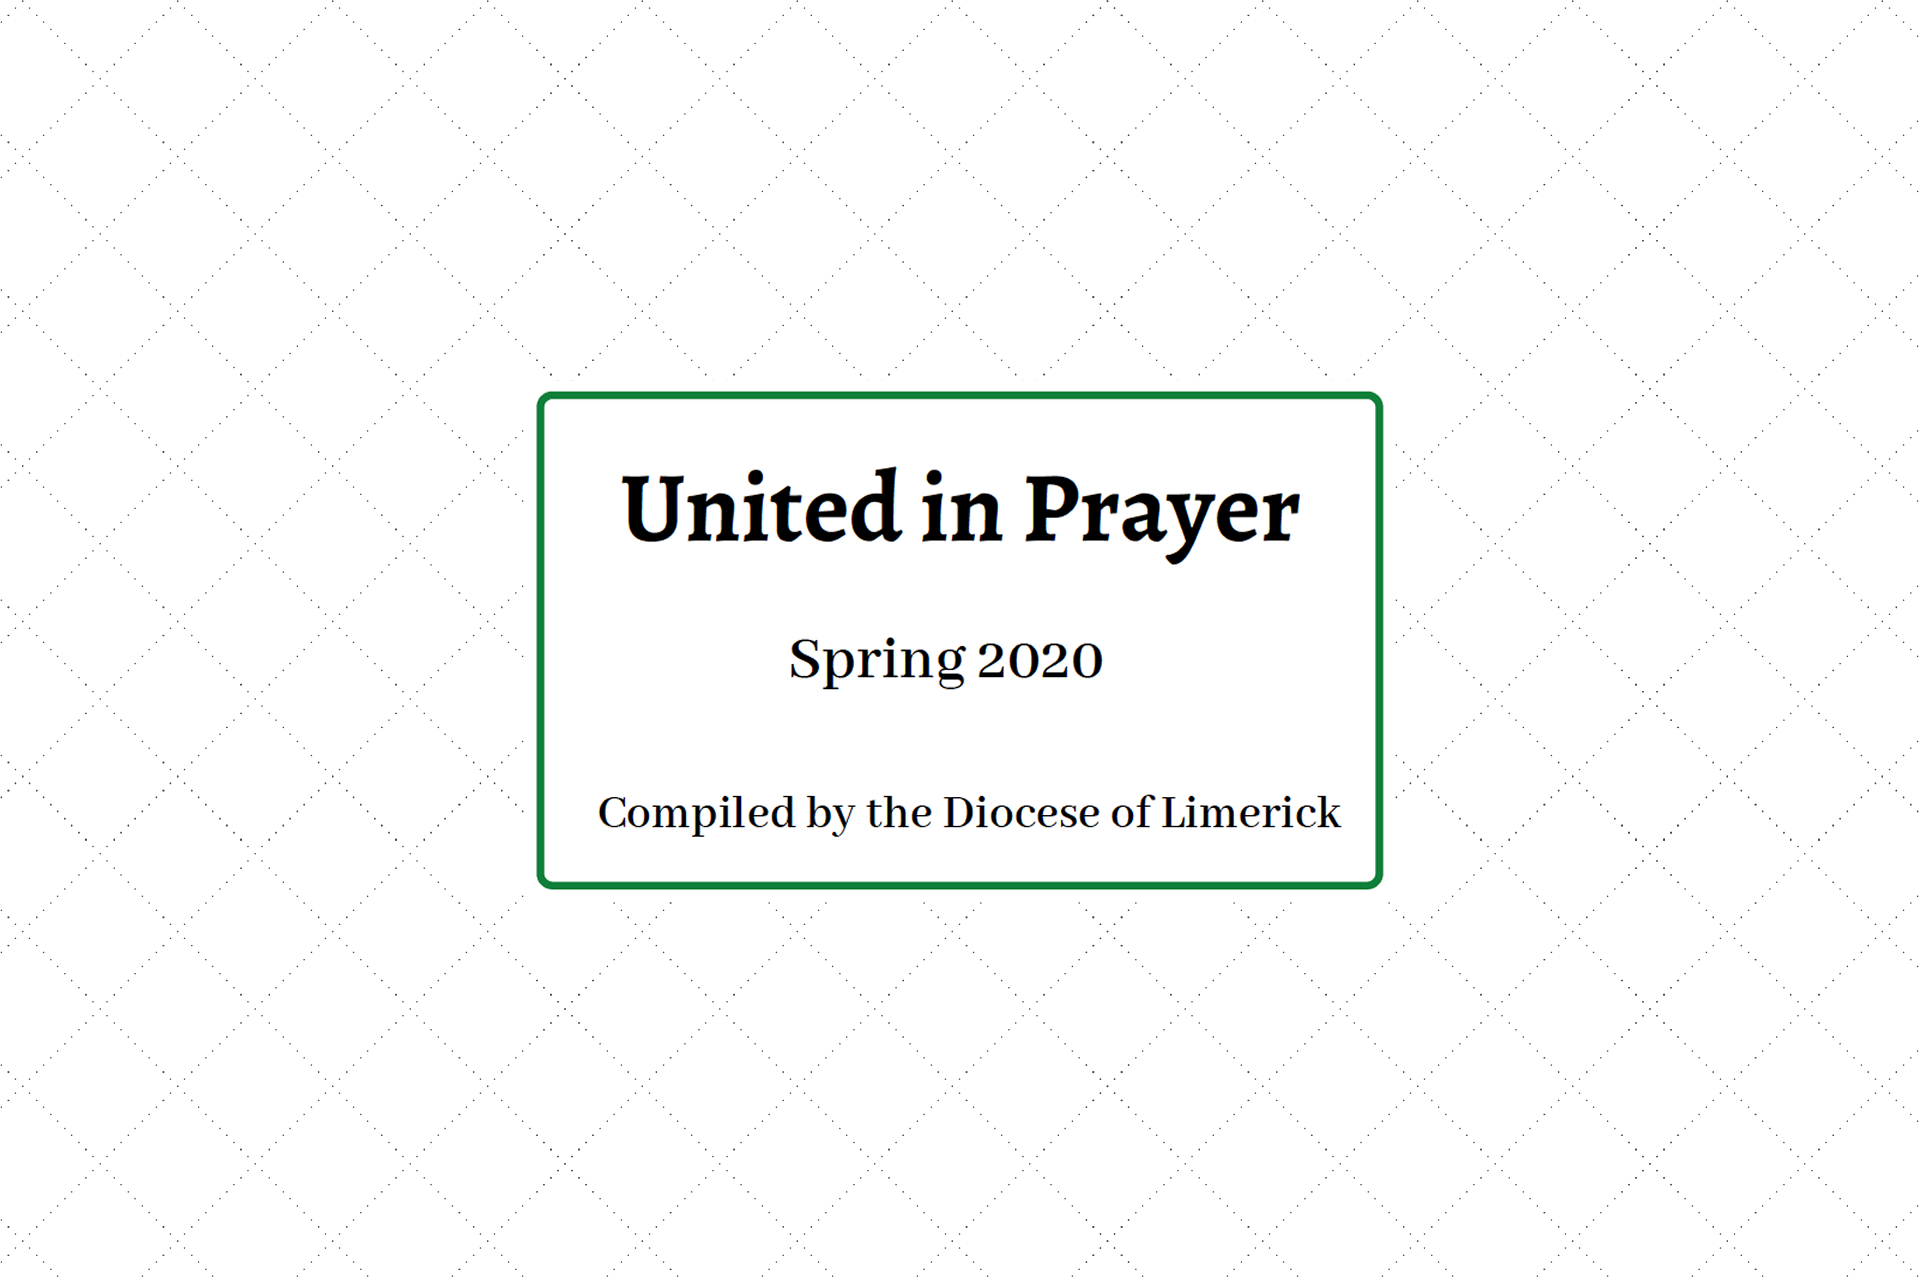 United in Prayer - A Booklet of Prayers